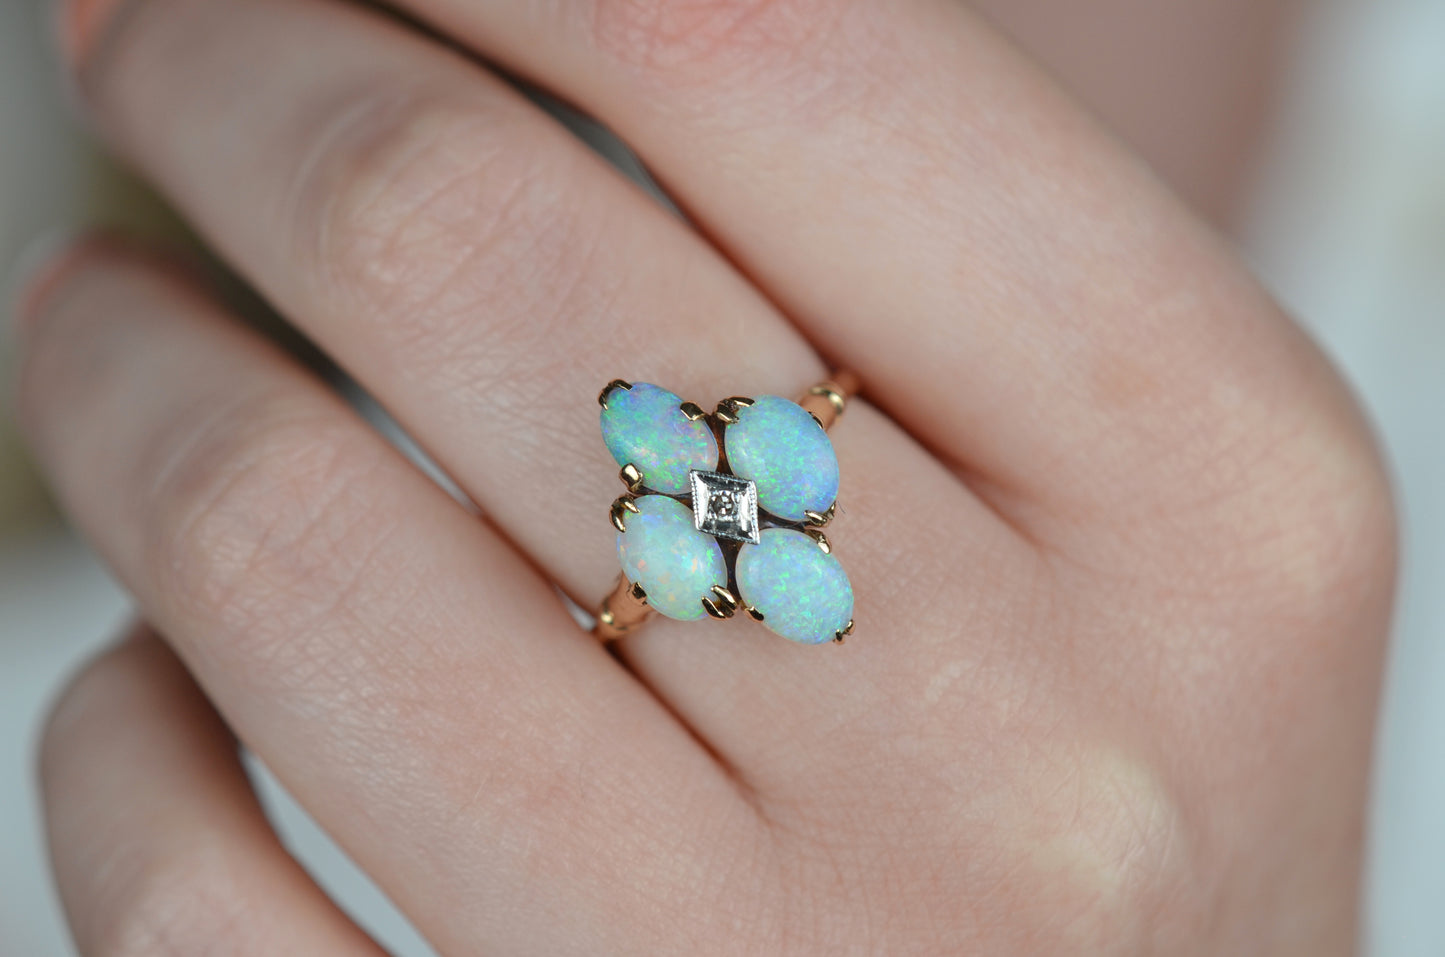 Victorian Revival Opal Cluster Ring